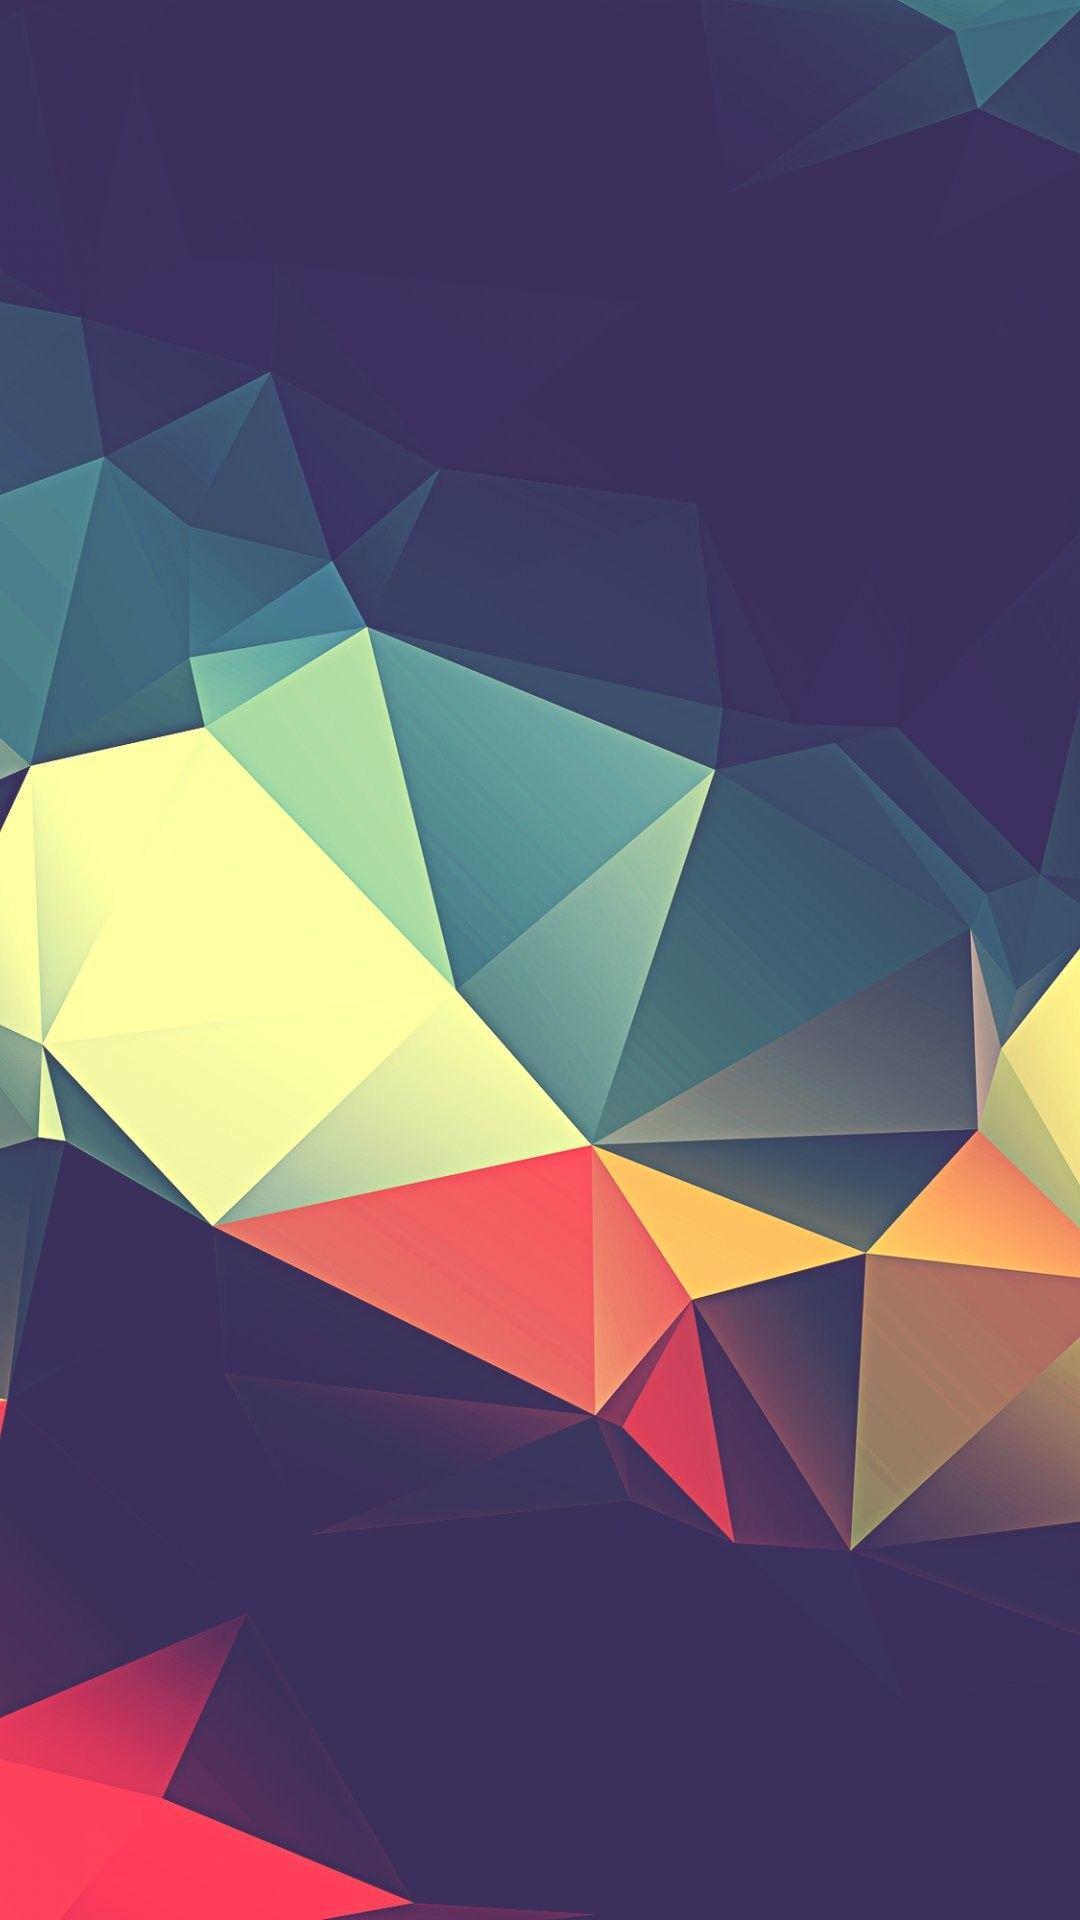 Low Poly iPhone 6 Plus Wallpaper 35941 iPhone 6 Plus